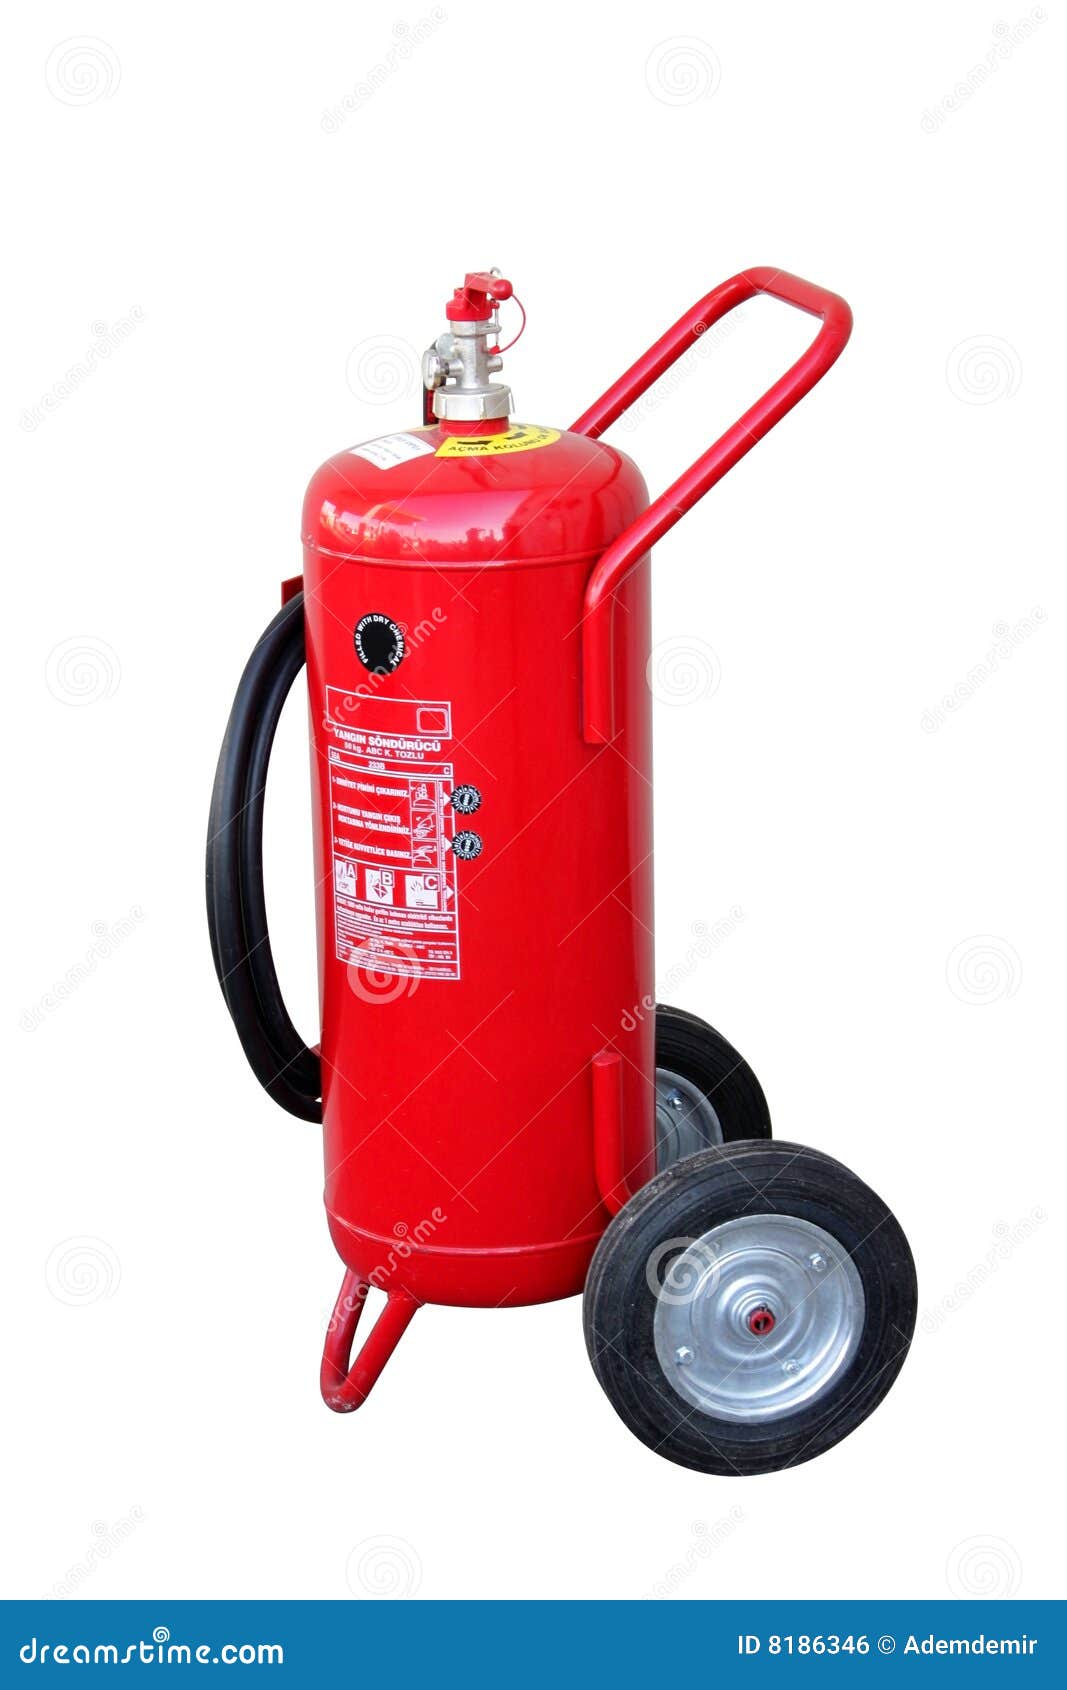 fire extinguisher - wheeled big - with clipping